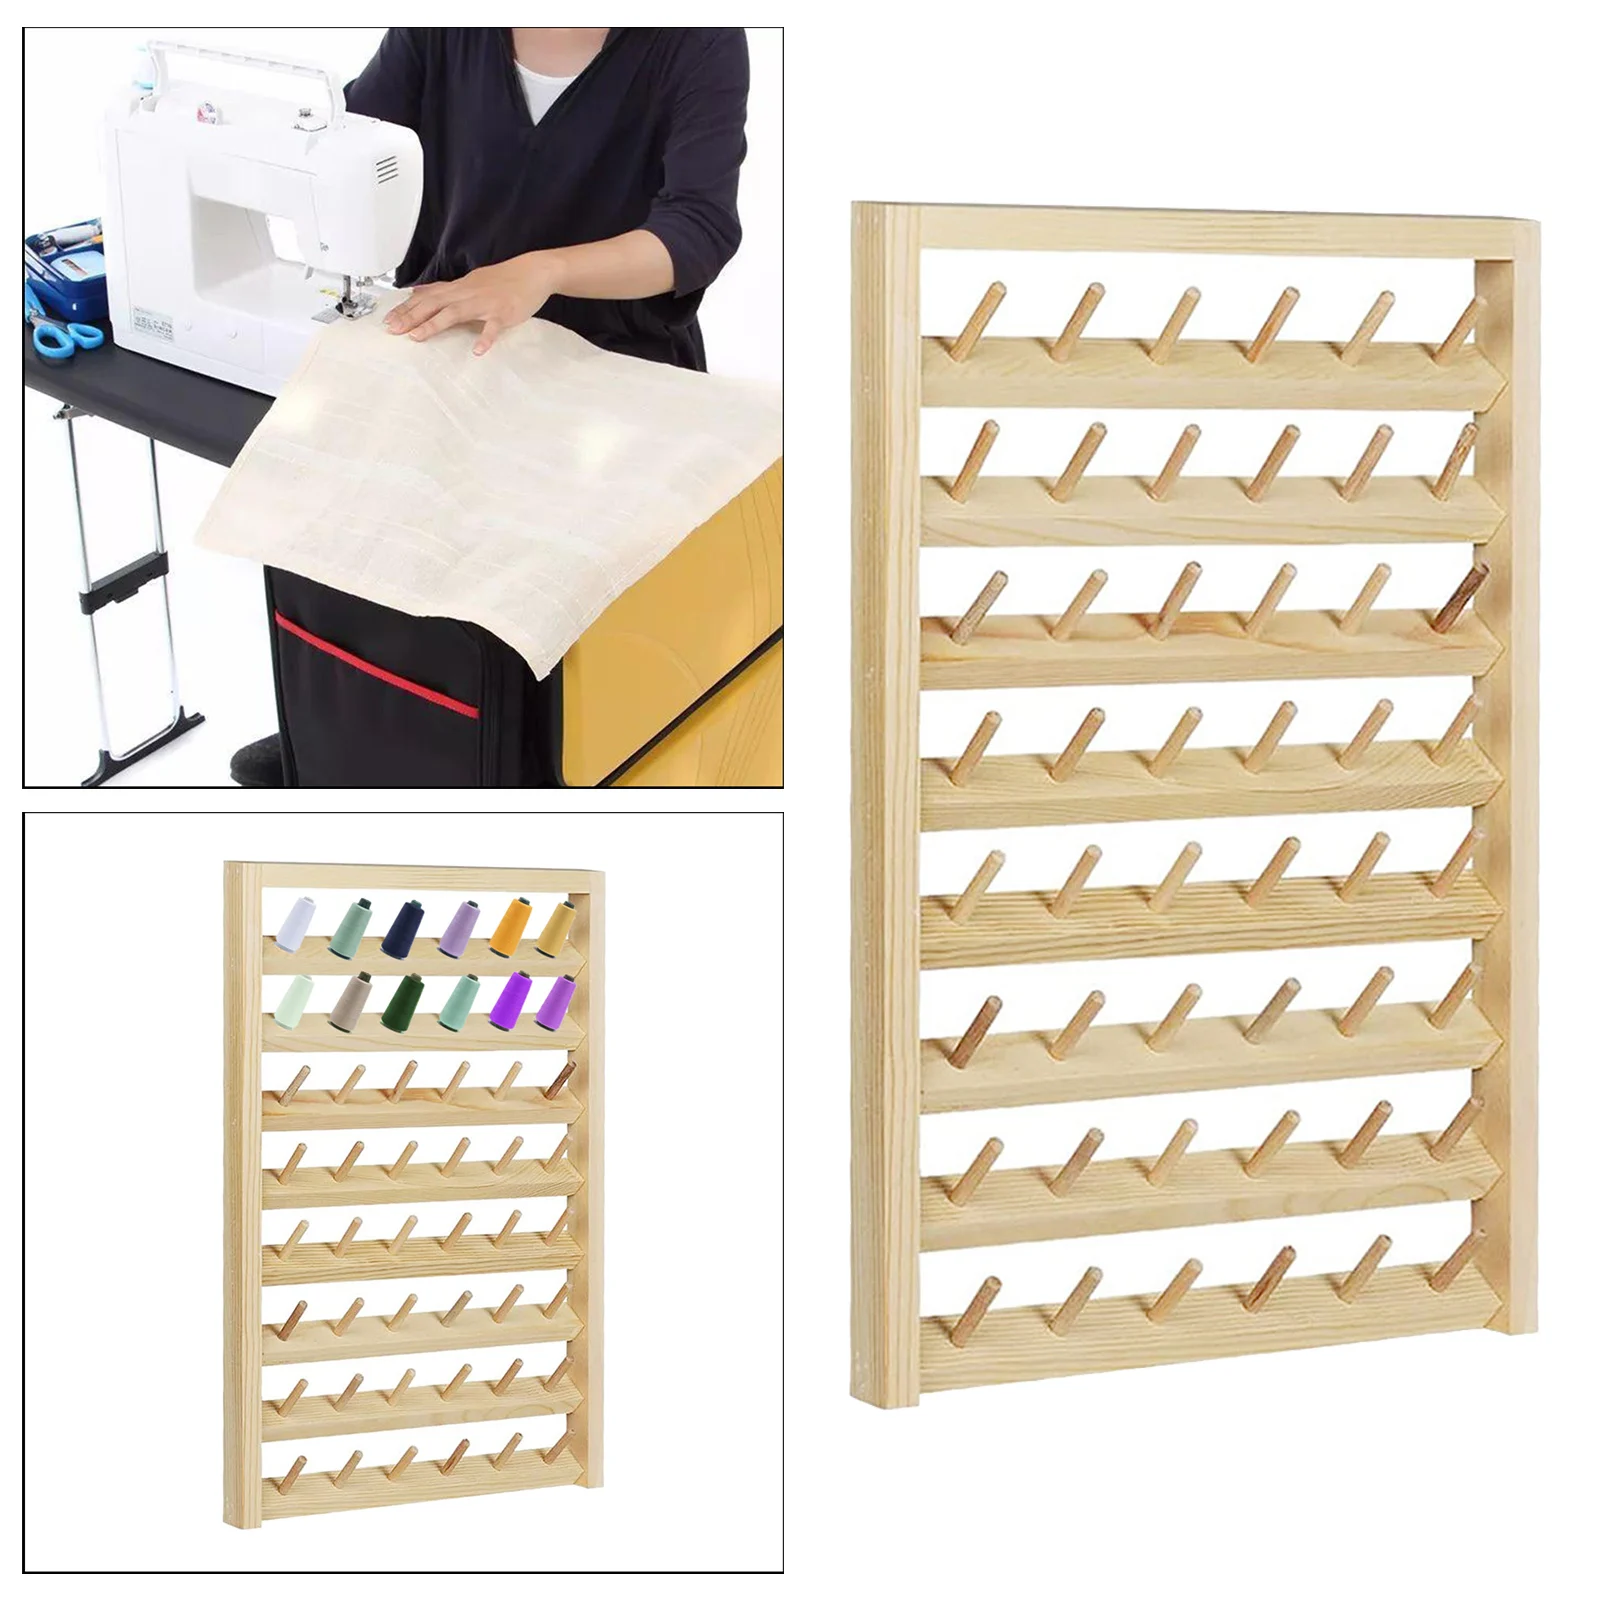 Multi Spool Sewing Thread Rack Holder, Wall-Mounted Thread Holder Organizer for Sewing, Embroidery, Quilting, Hair Braiding